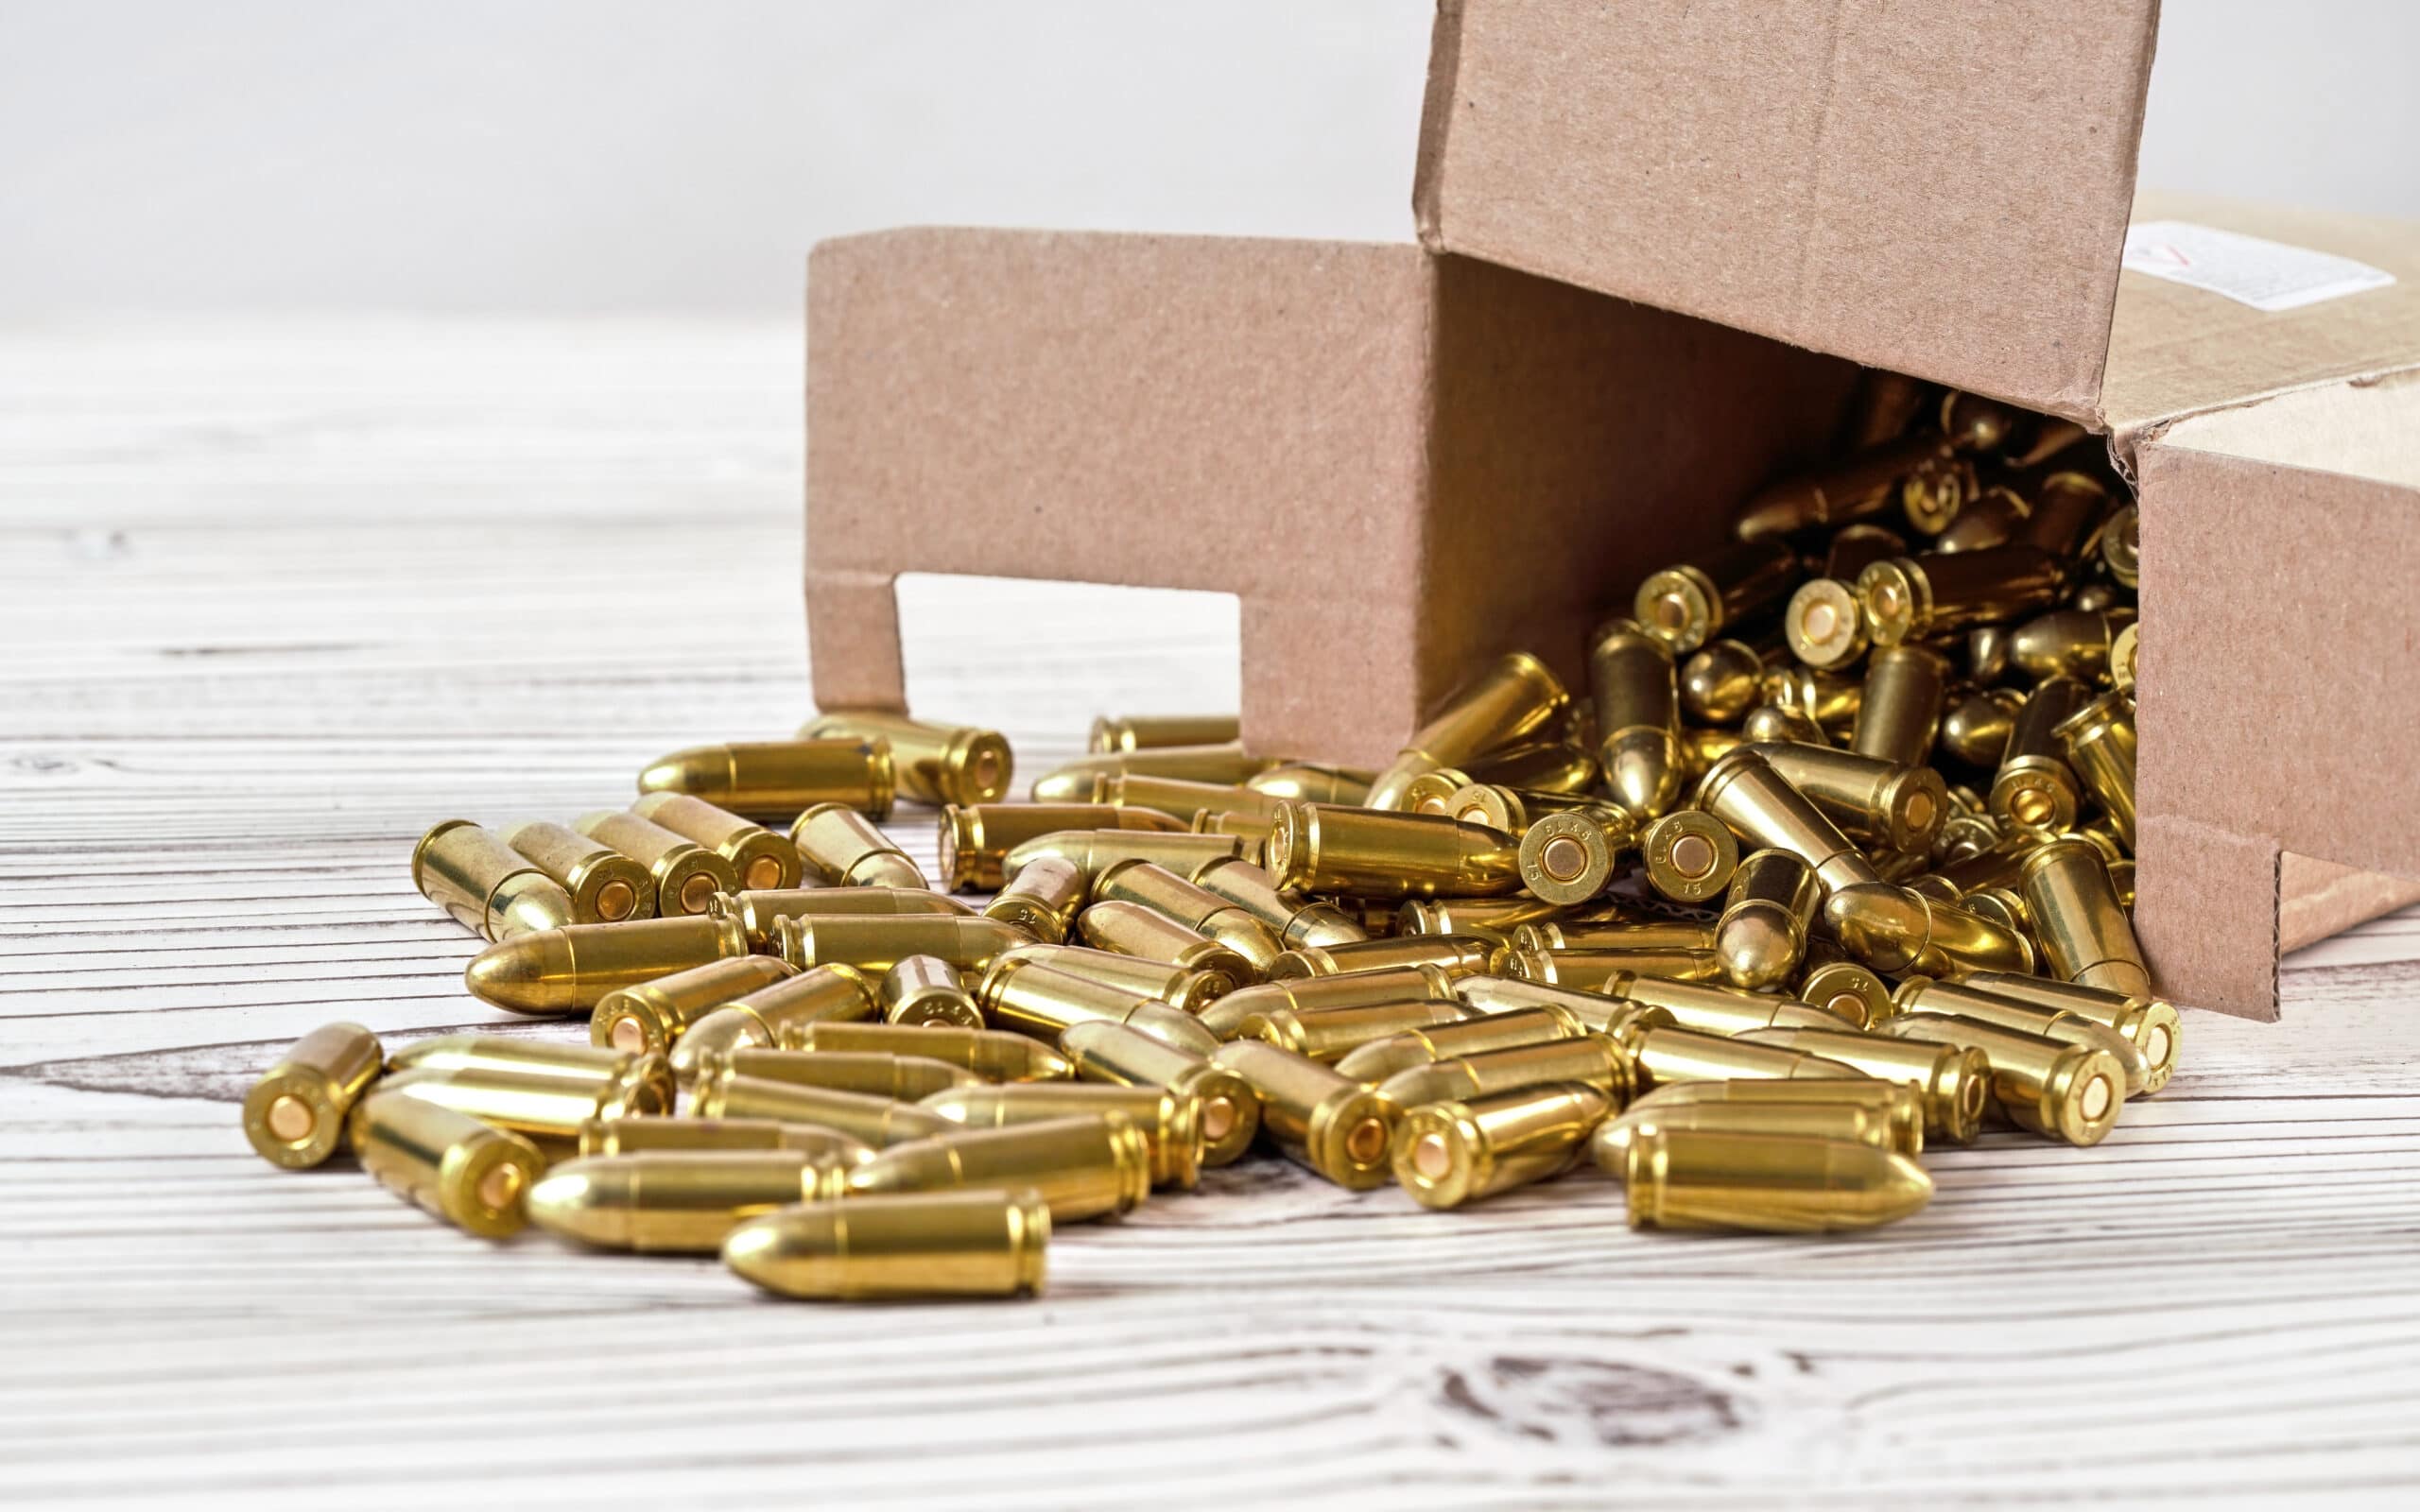 Yellow brass gun ammo spilled from paper carton box on white boar desk - close up